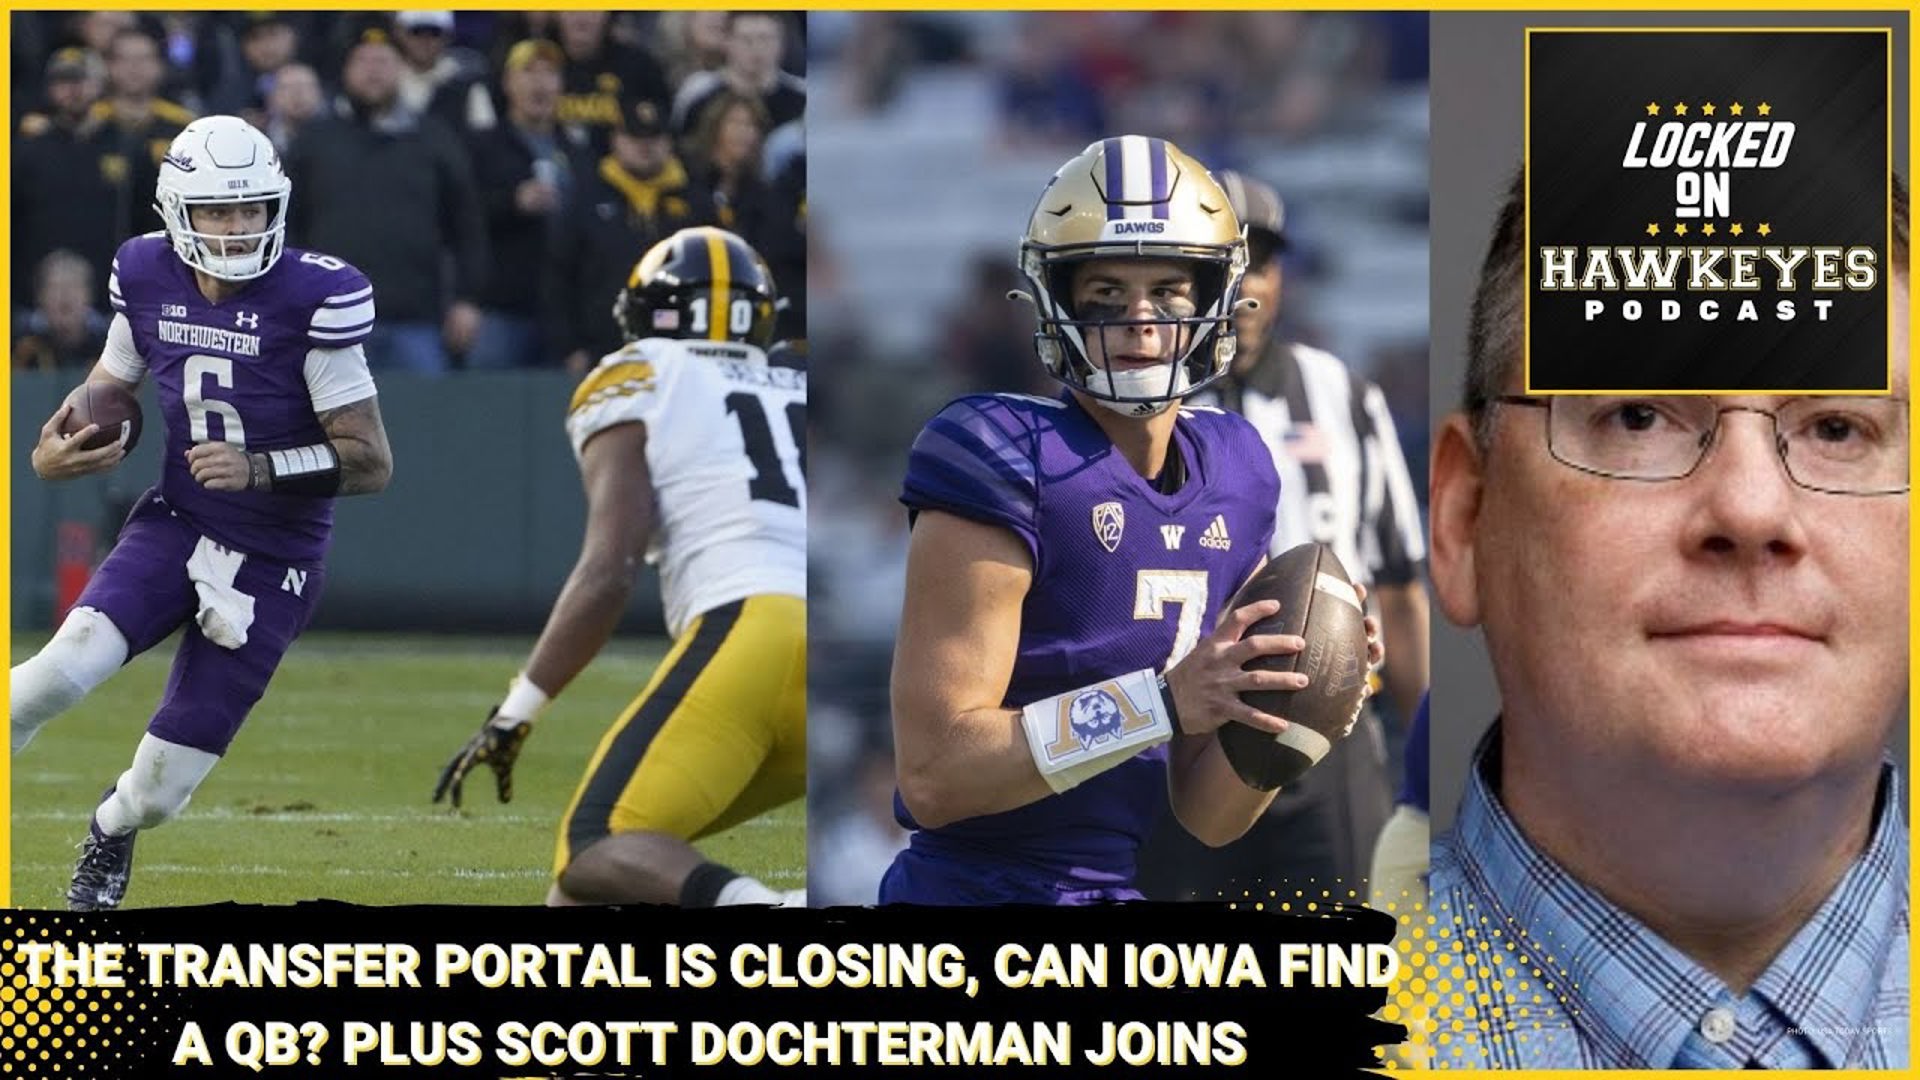 Iowa Football The Transfer Portal is closing, do the Hawkeyes have a QB? Scott Dochterman joins